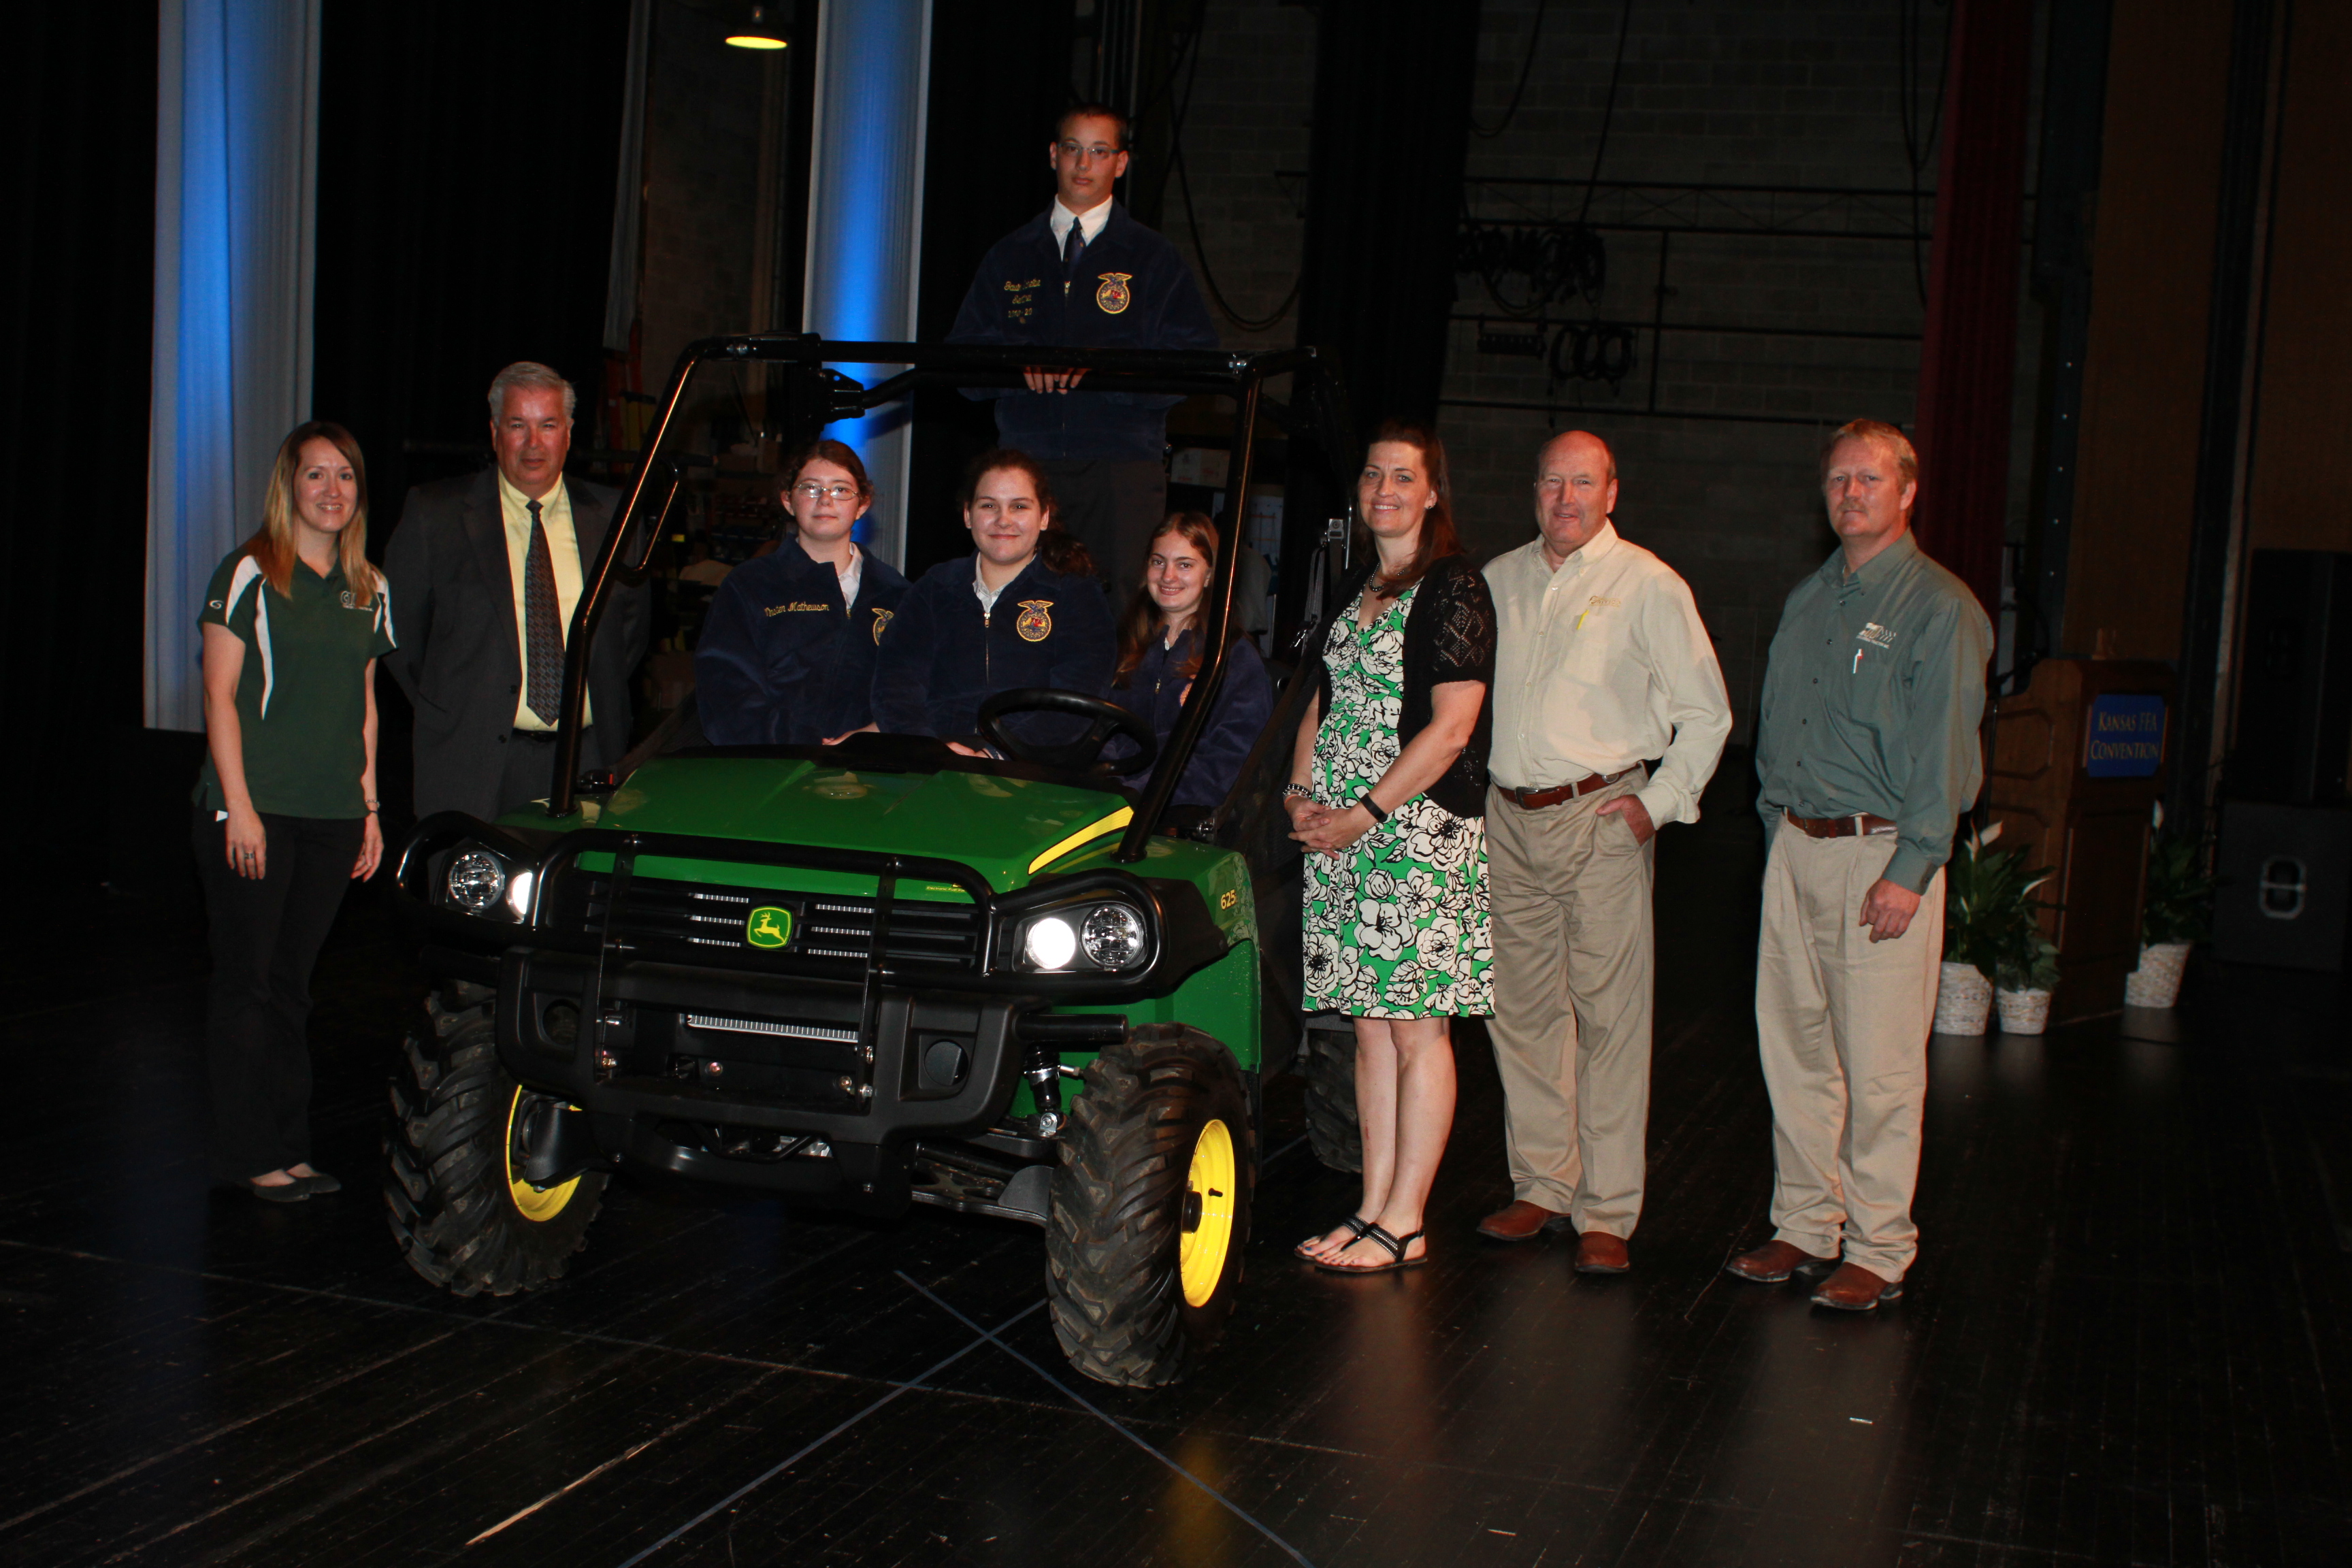 Lindsay Carpenter, Axtell FFA, sits in the driver's seat of her new John Deere Gator with members of her chapter and sponsor representatives. Sponsored by Kansas John Deere Dealers and John Deere Agriculture and Turf Division.  